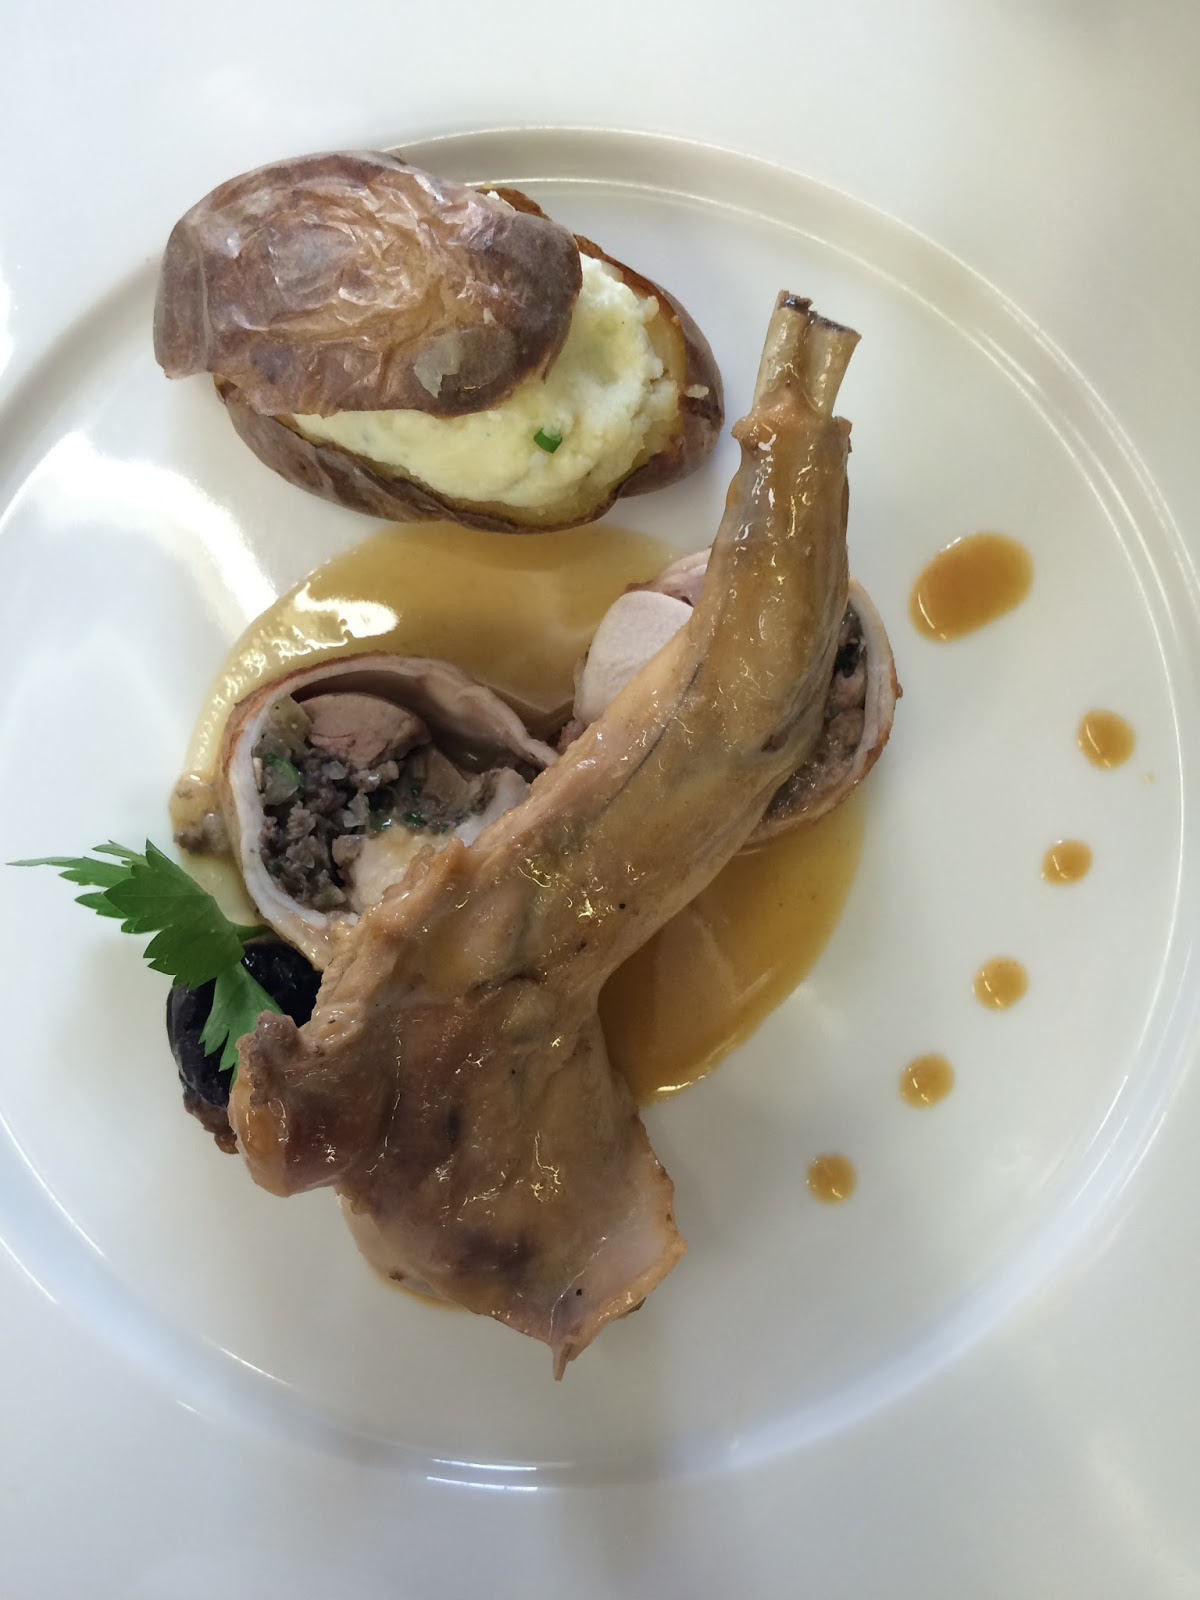 Rabbit Dish from Practical Class